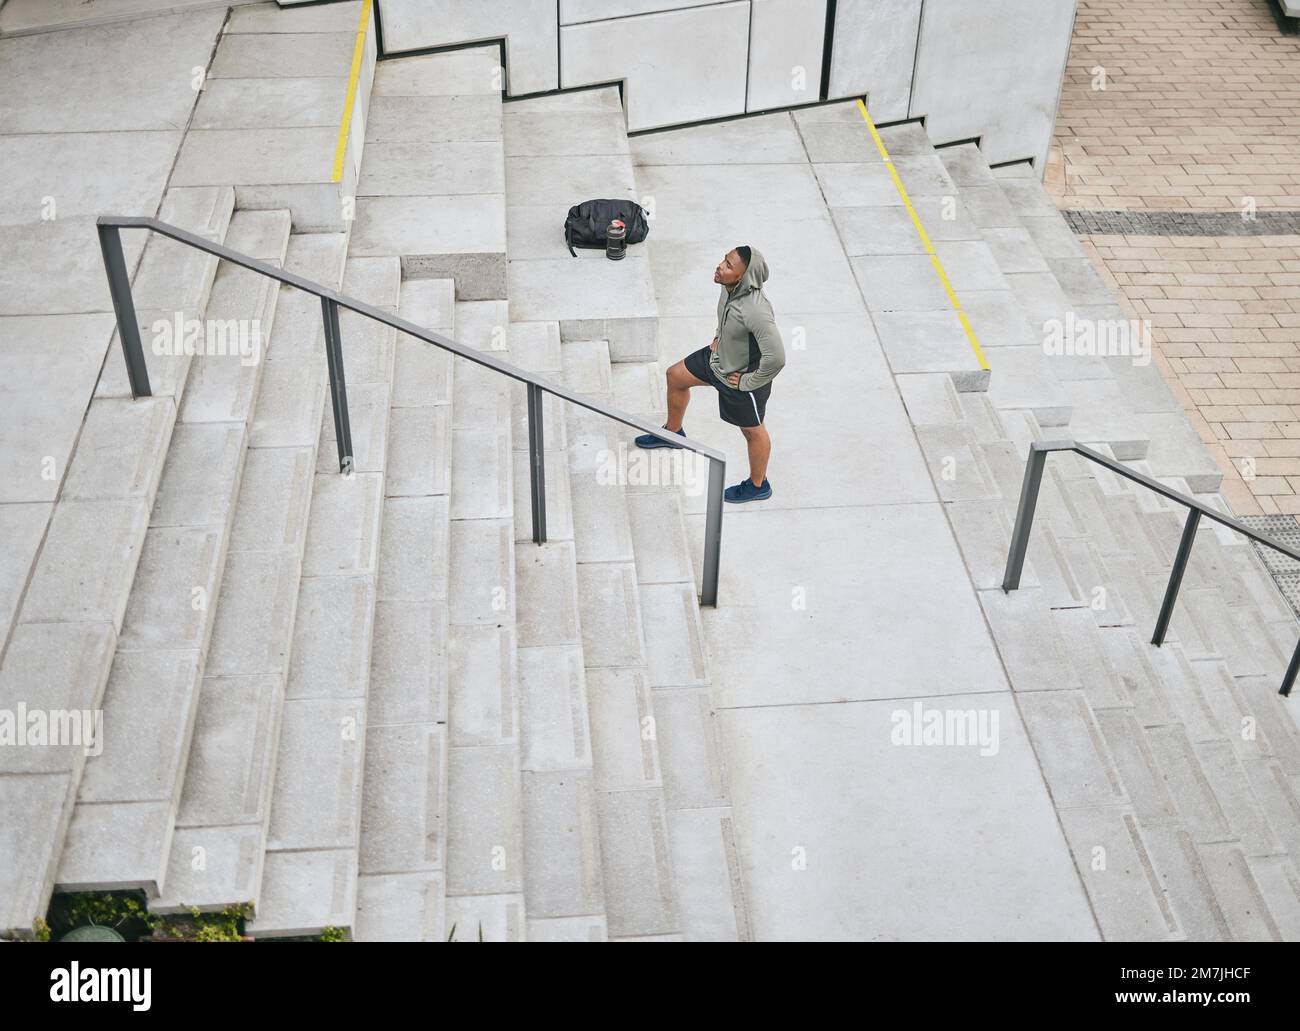 Fitness, tired or black man walking on stairs for training, exercise or cardio workout in Chicago, USA. Mission, mindset or healthy athlete in hoodie Stock Photo